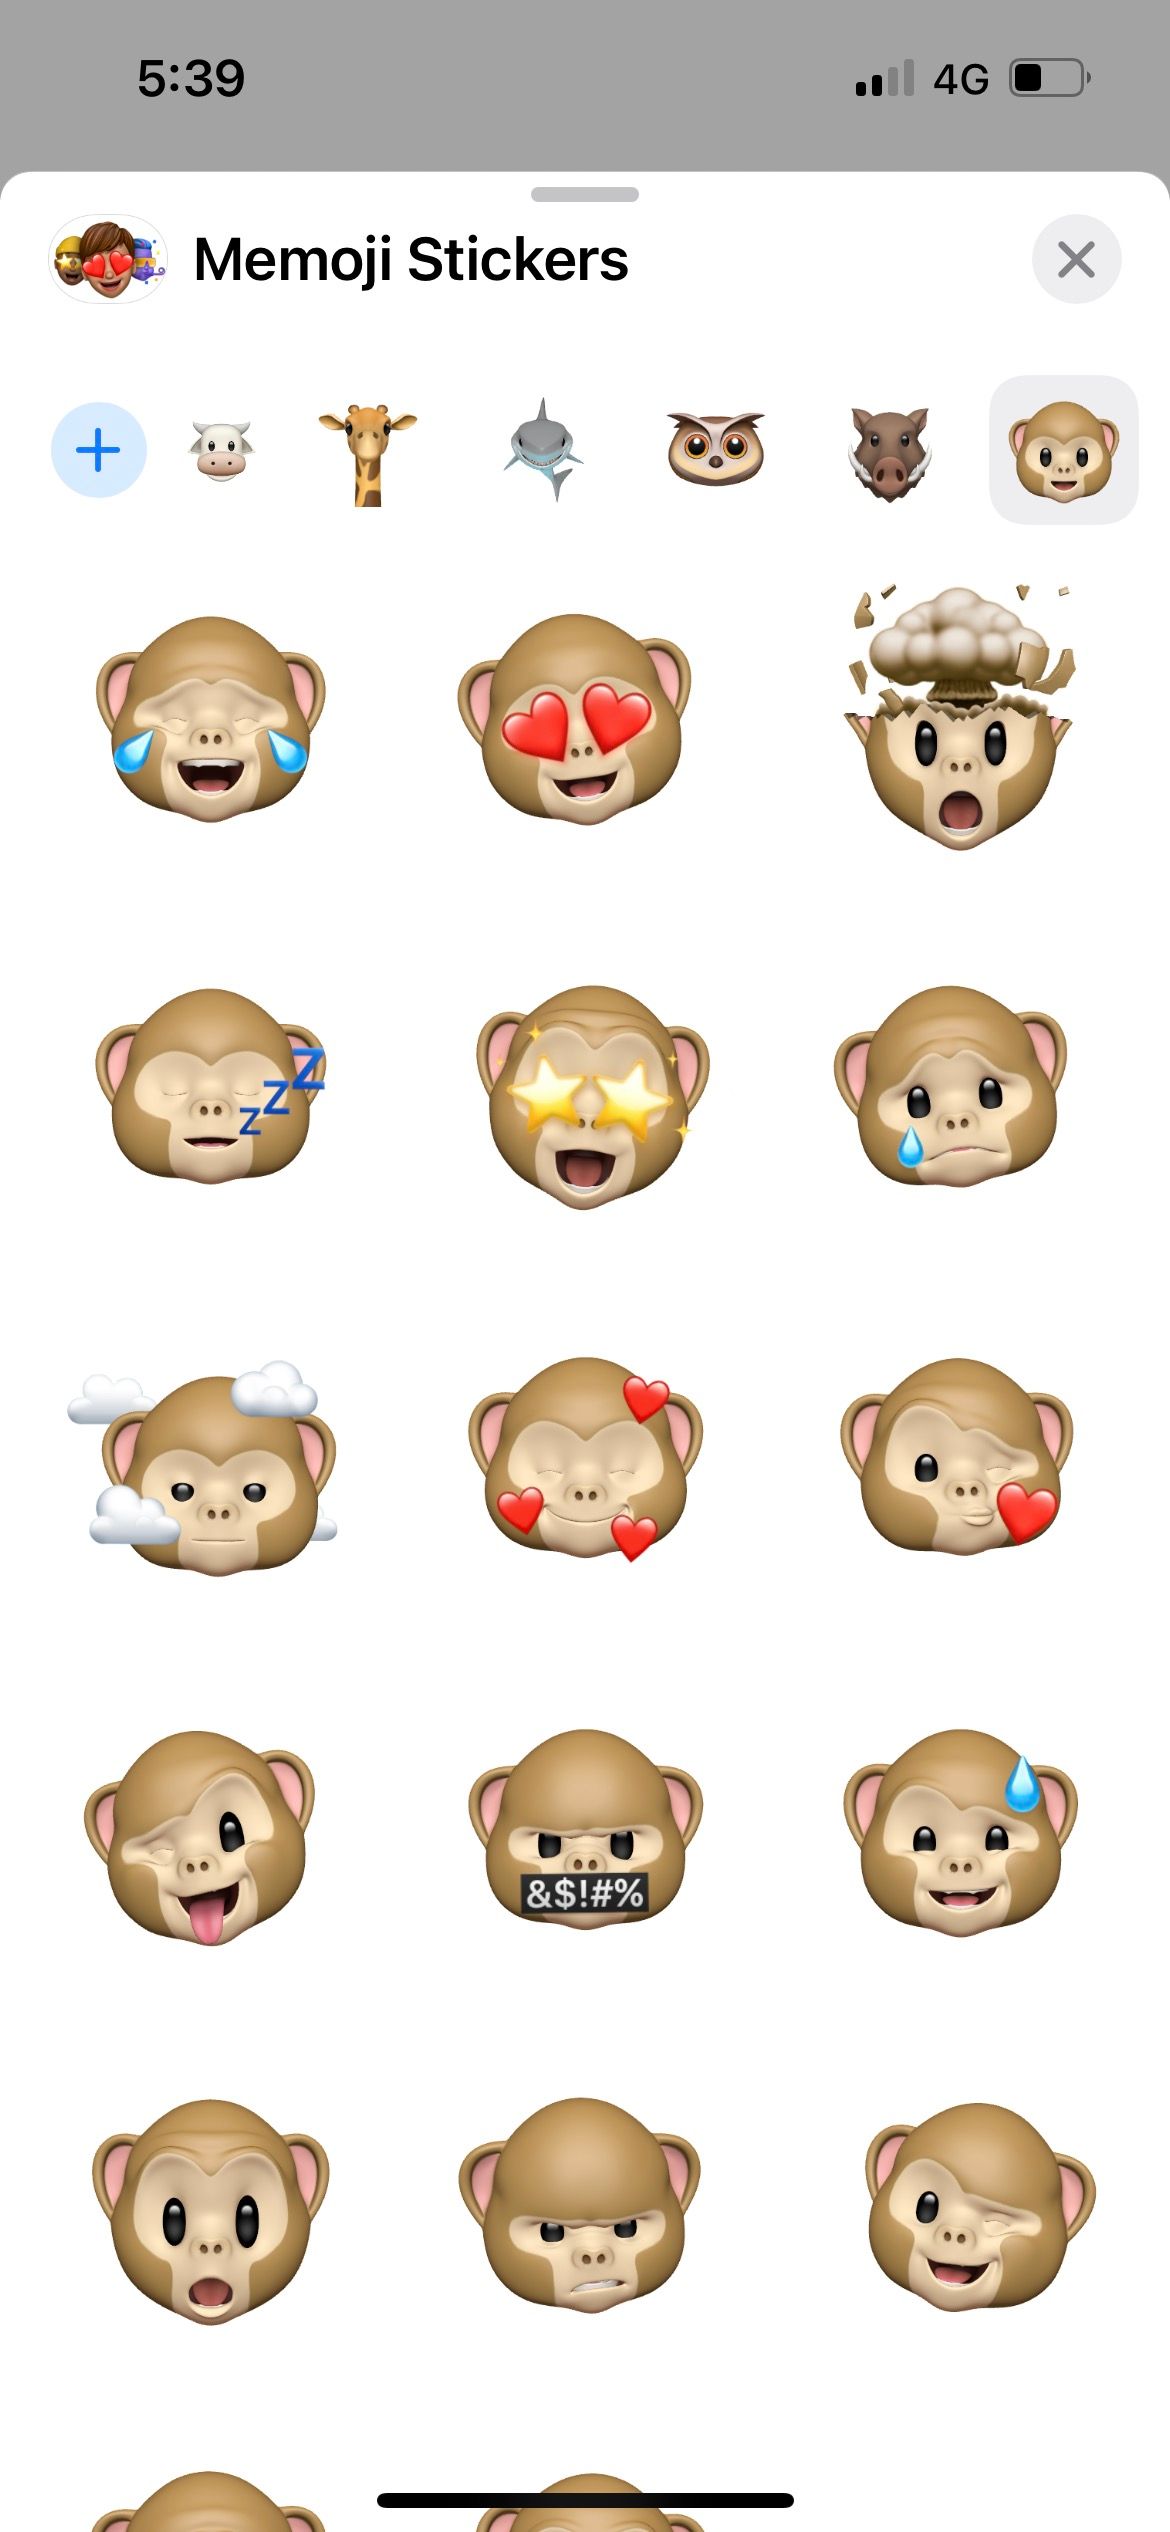 monkey animoji sticker pack in iphone messages app